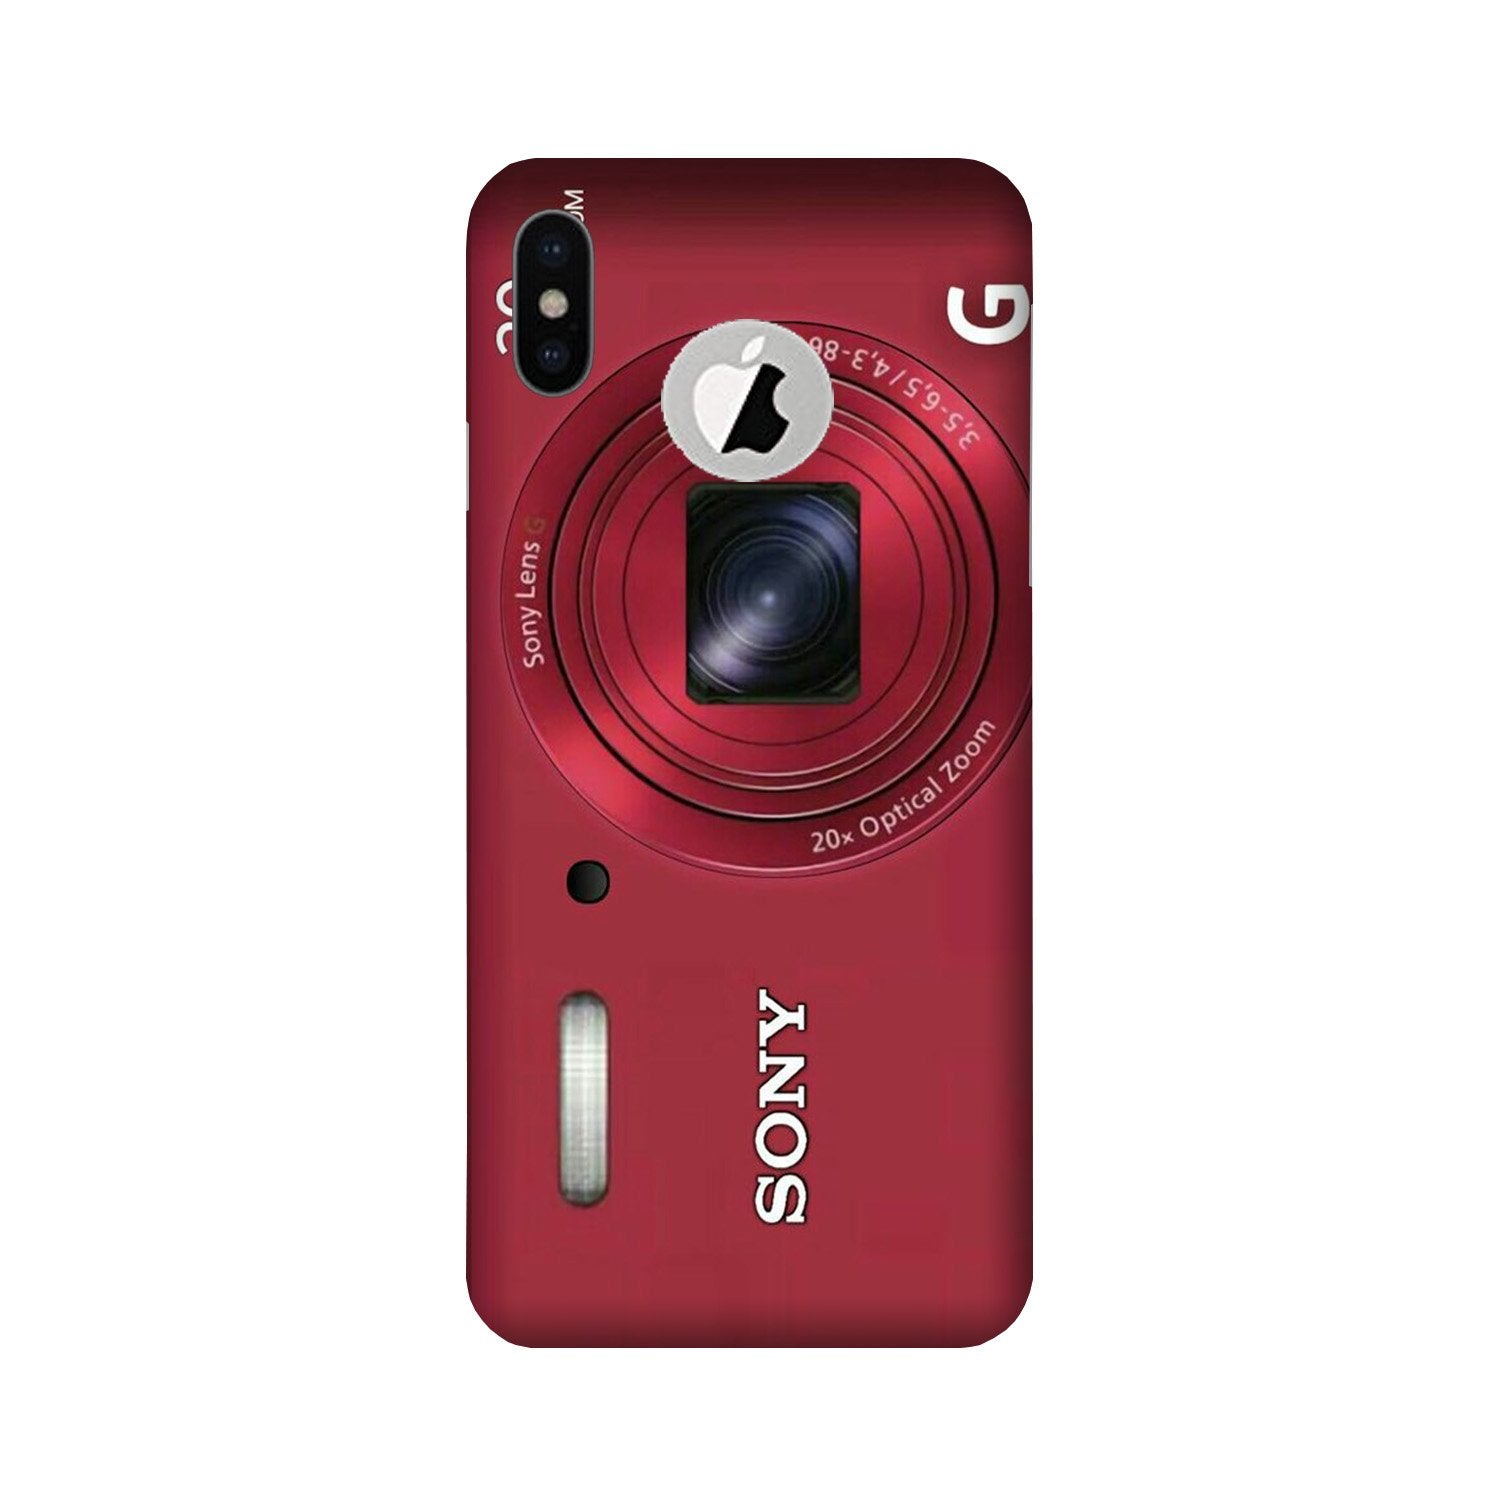 Sony Case for iPhone X logo cut (Design No. 274)